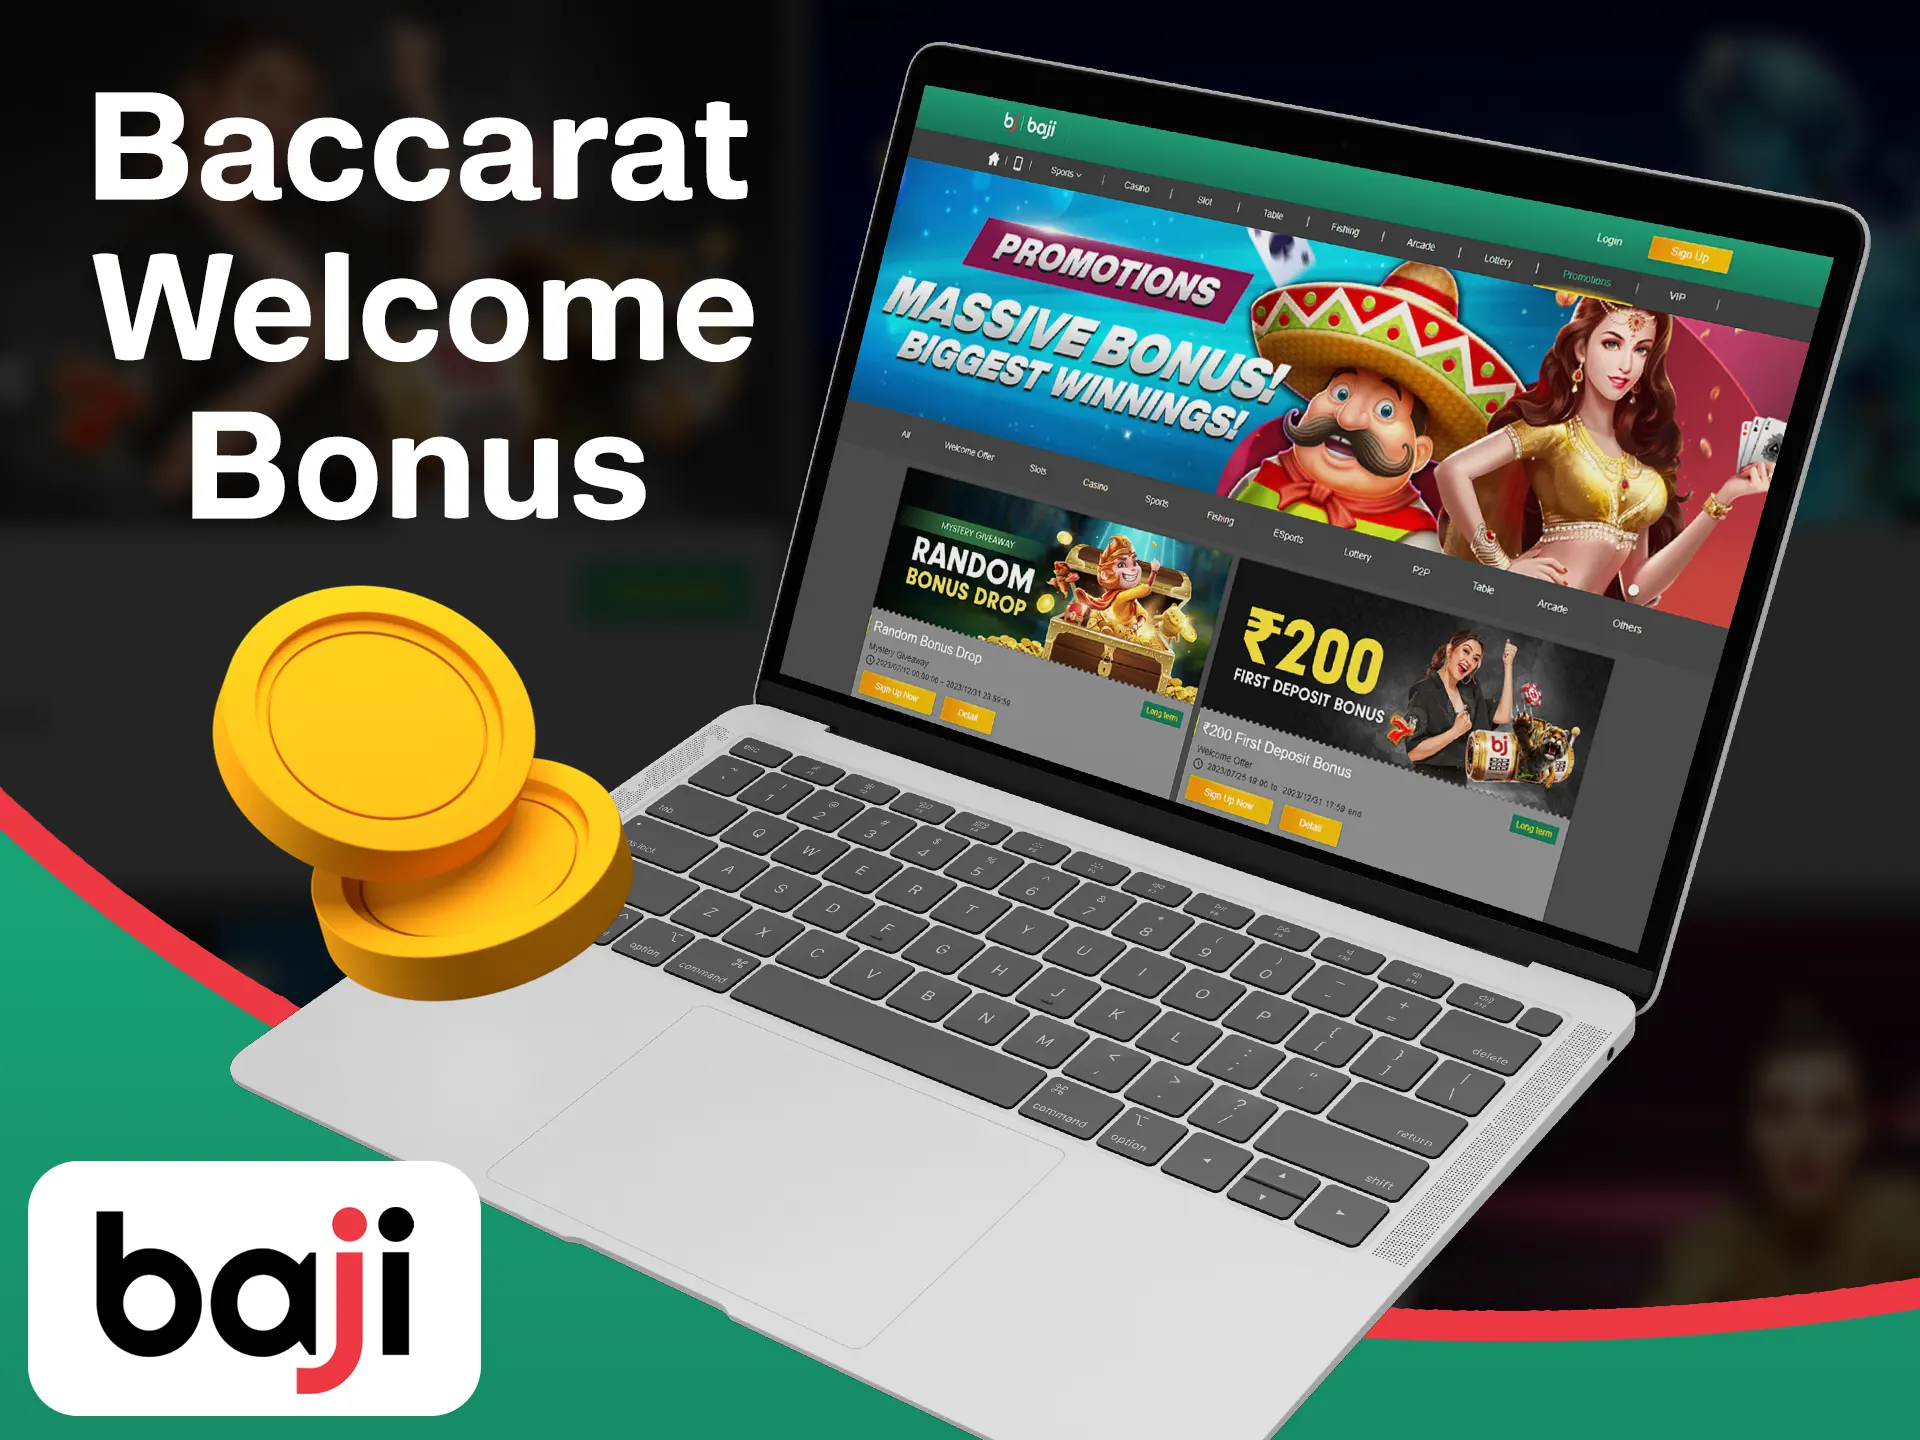 Get your baccarat welcome bonus after playing it at the Baji.